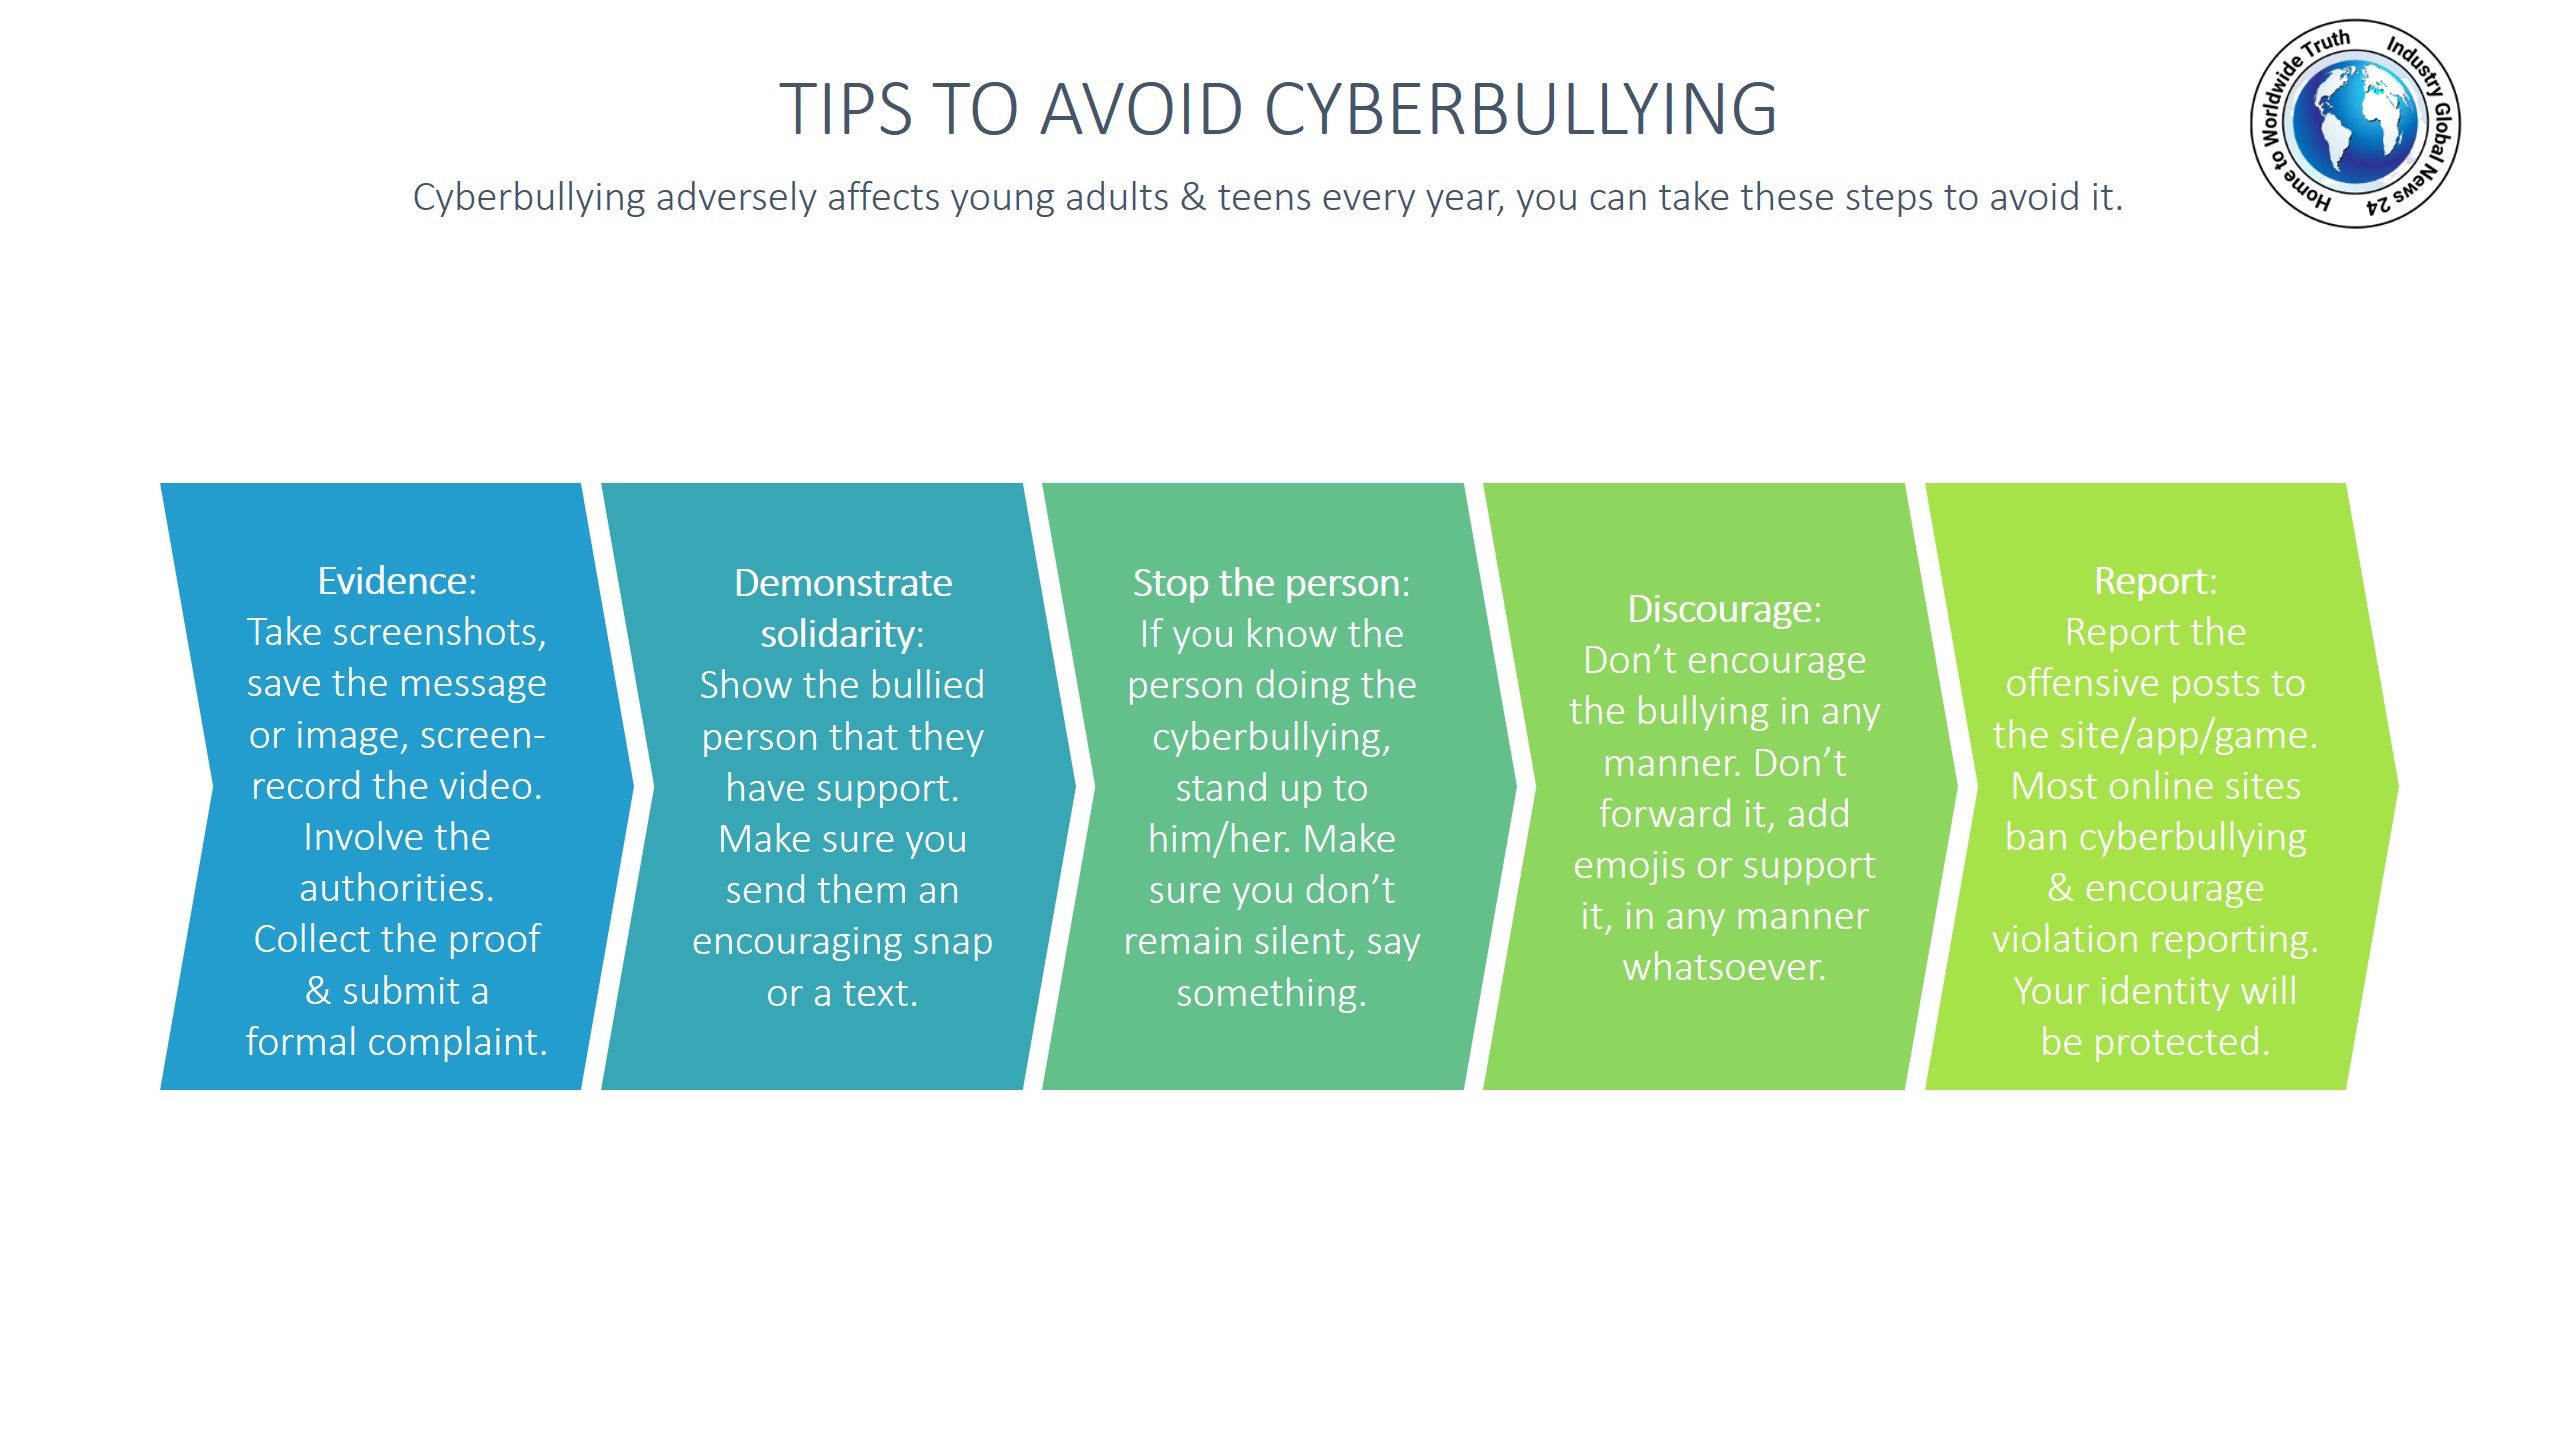 Tips to avoid cyberbullying